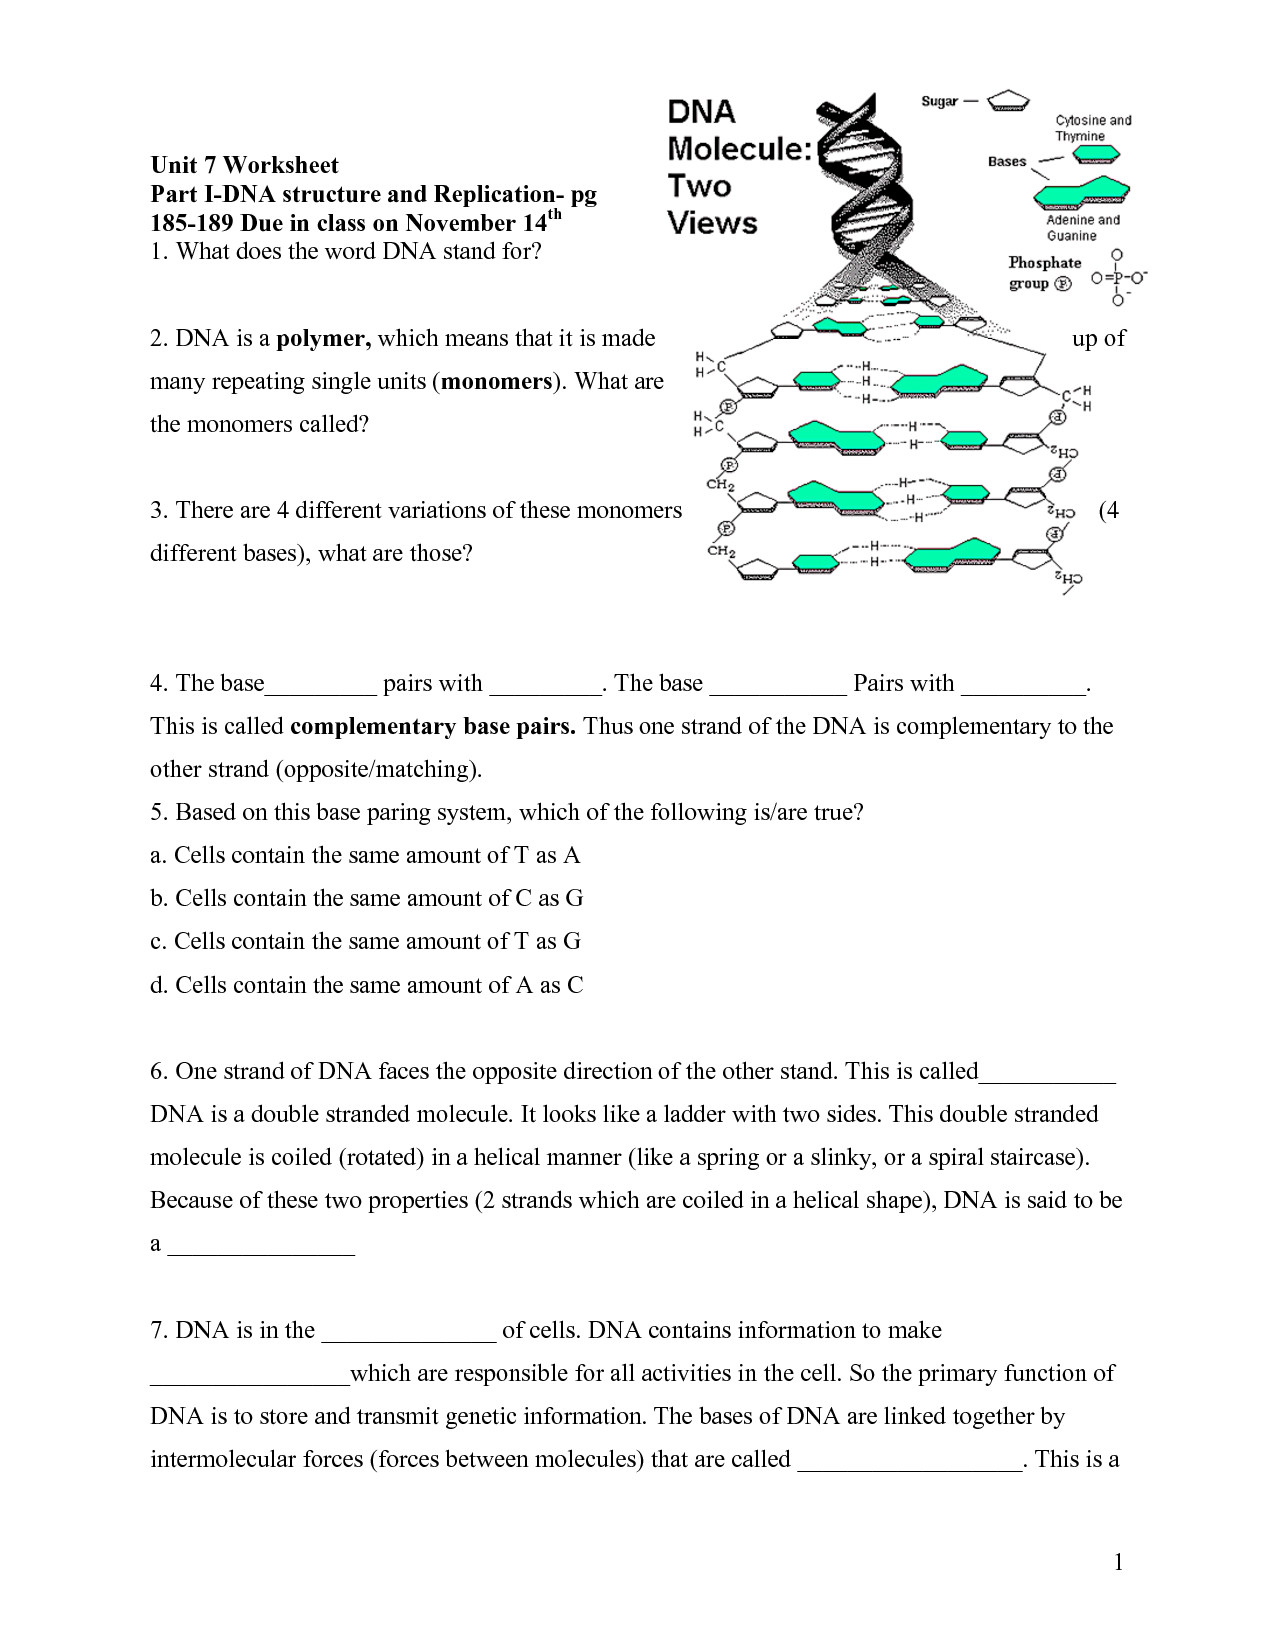 Dna structure and function worksheet answer key - Search